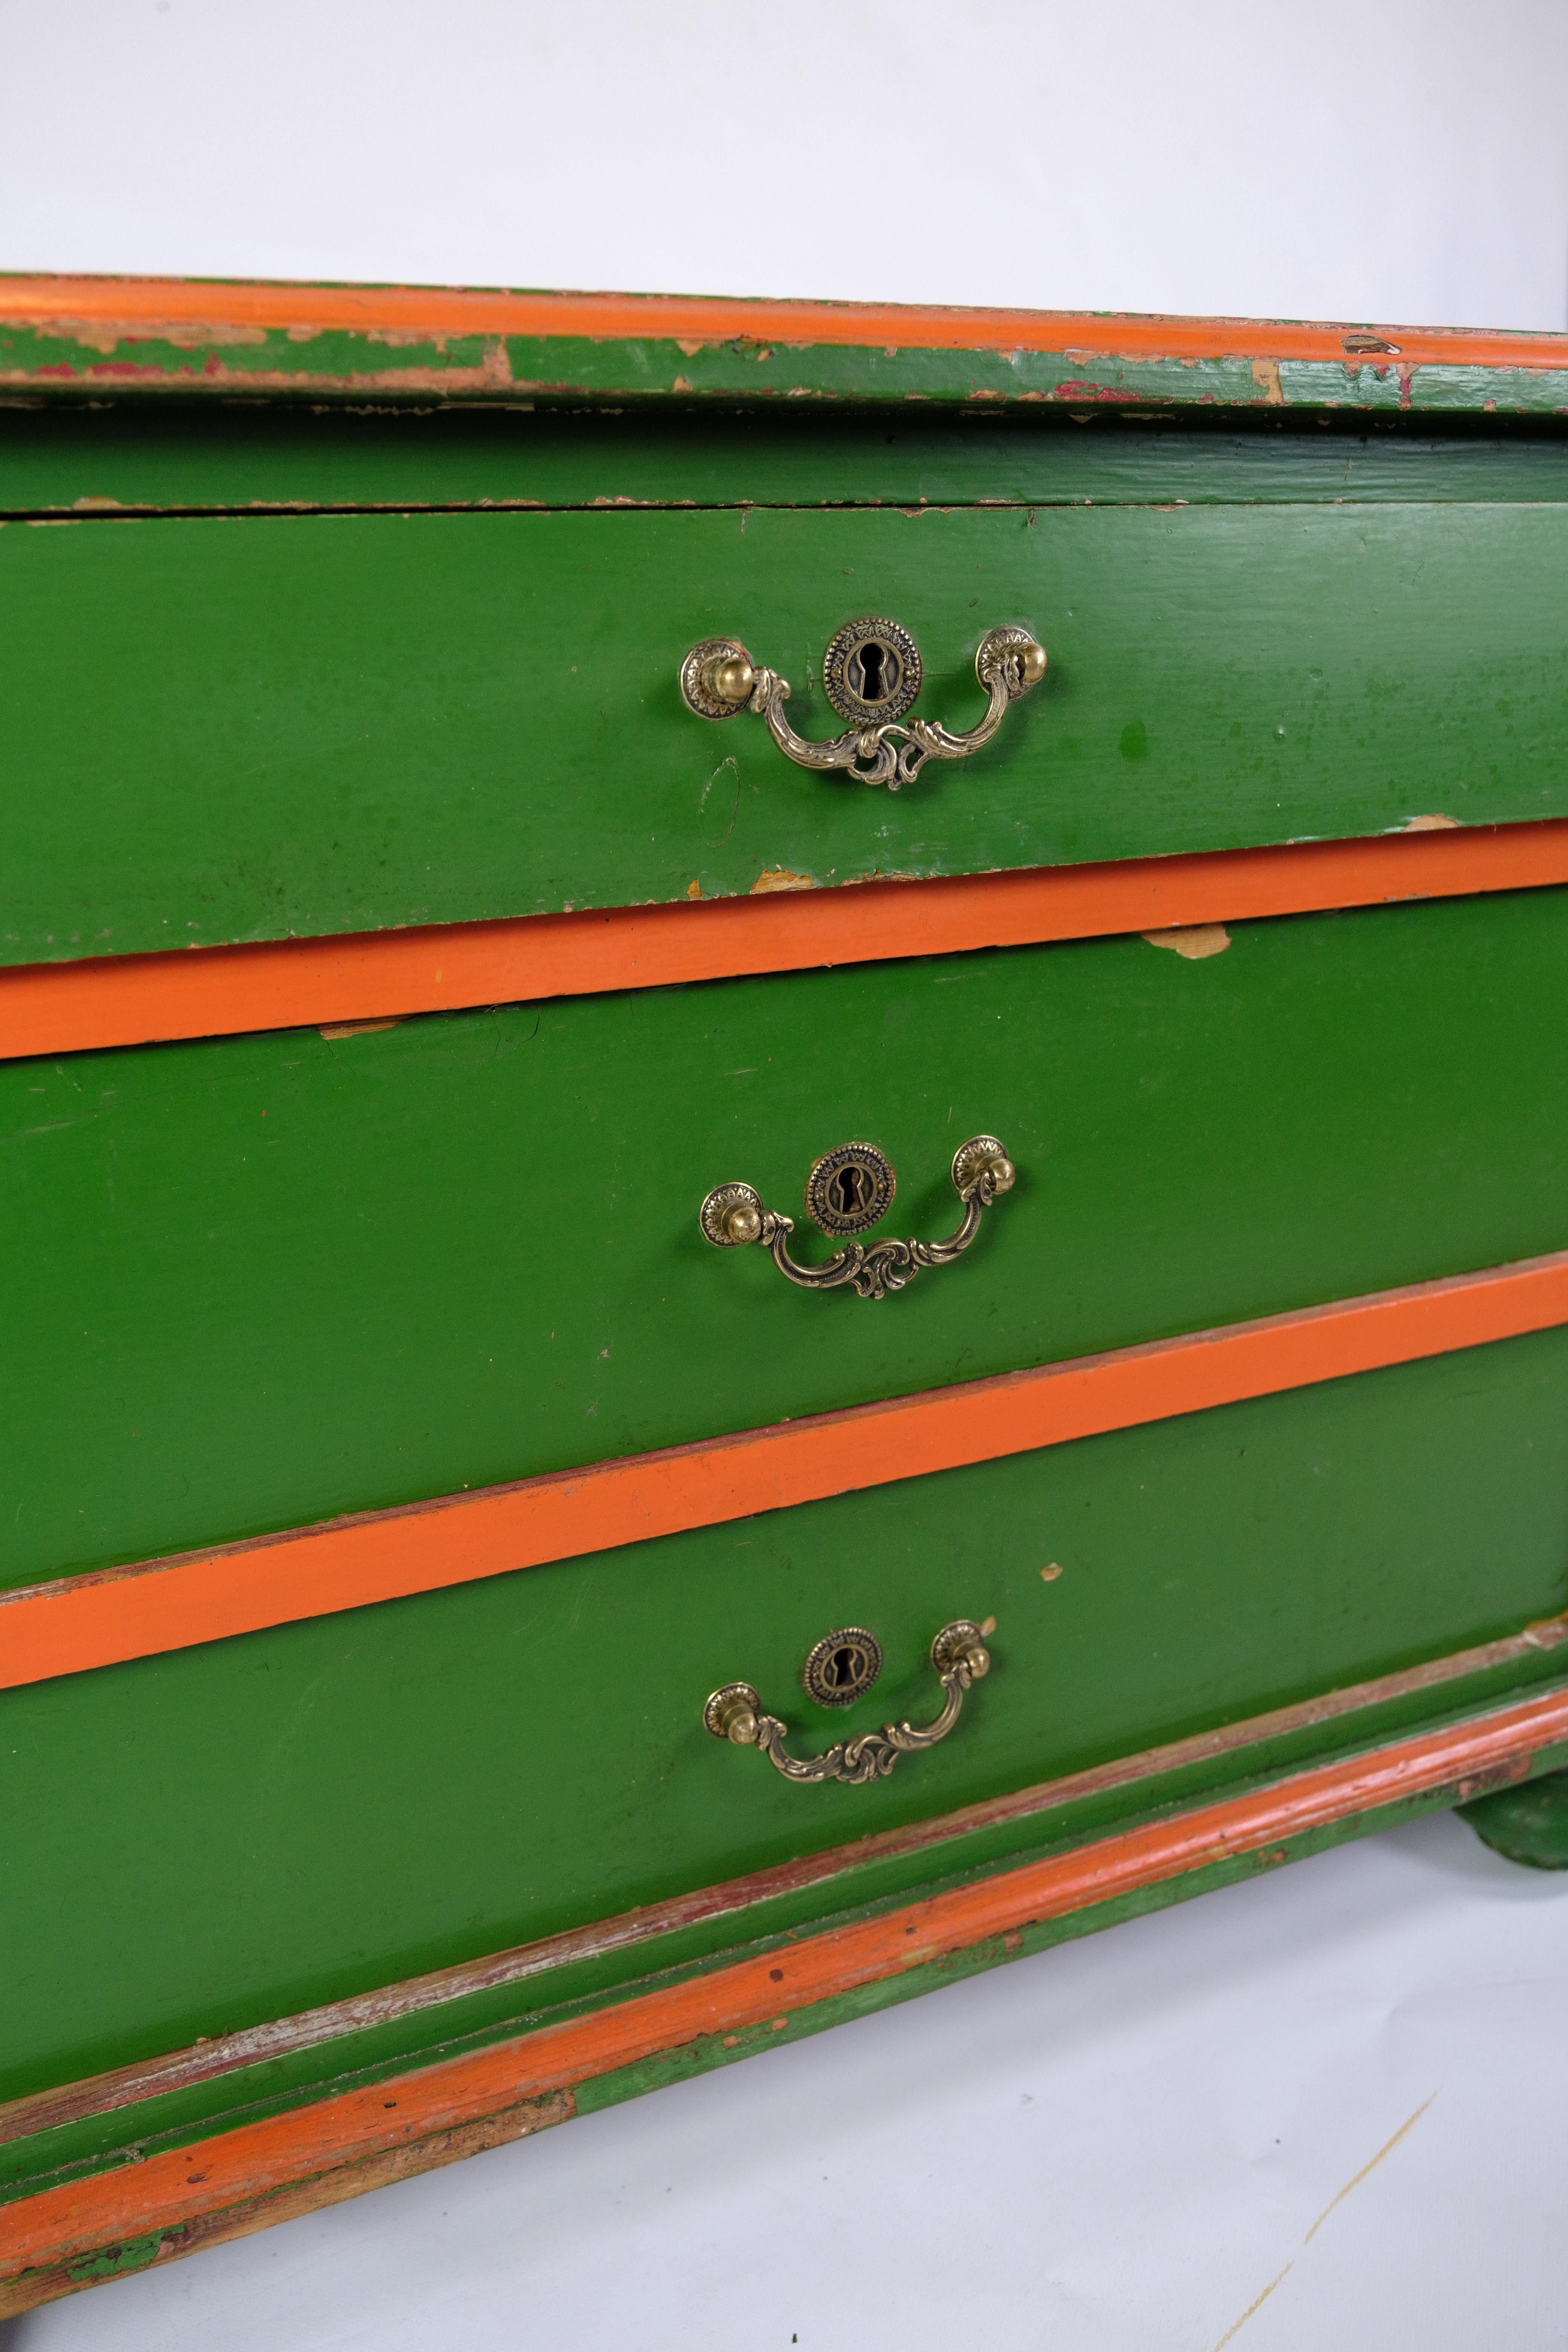 Other Small Antique Chest Of Drawers Painted In Green With Red Edges From 1890s For Sale